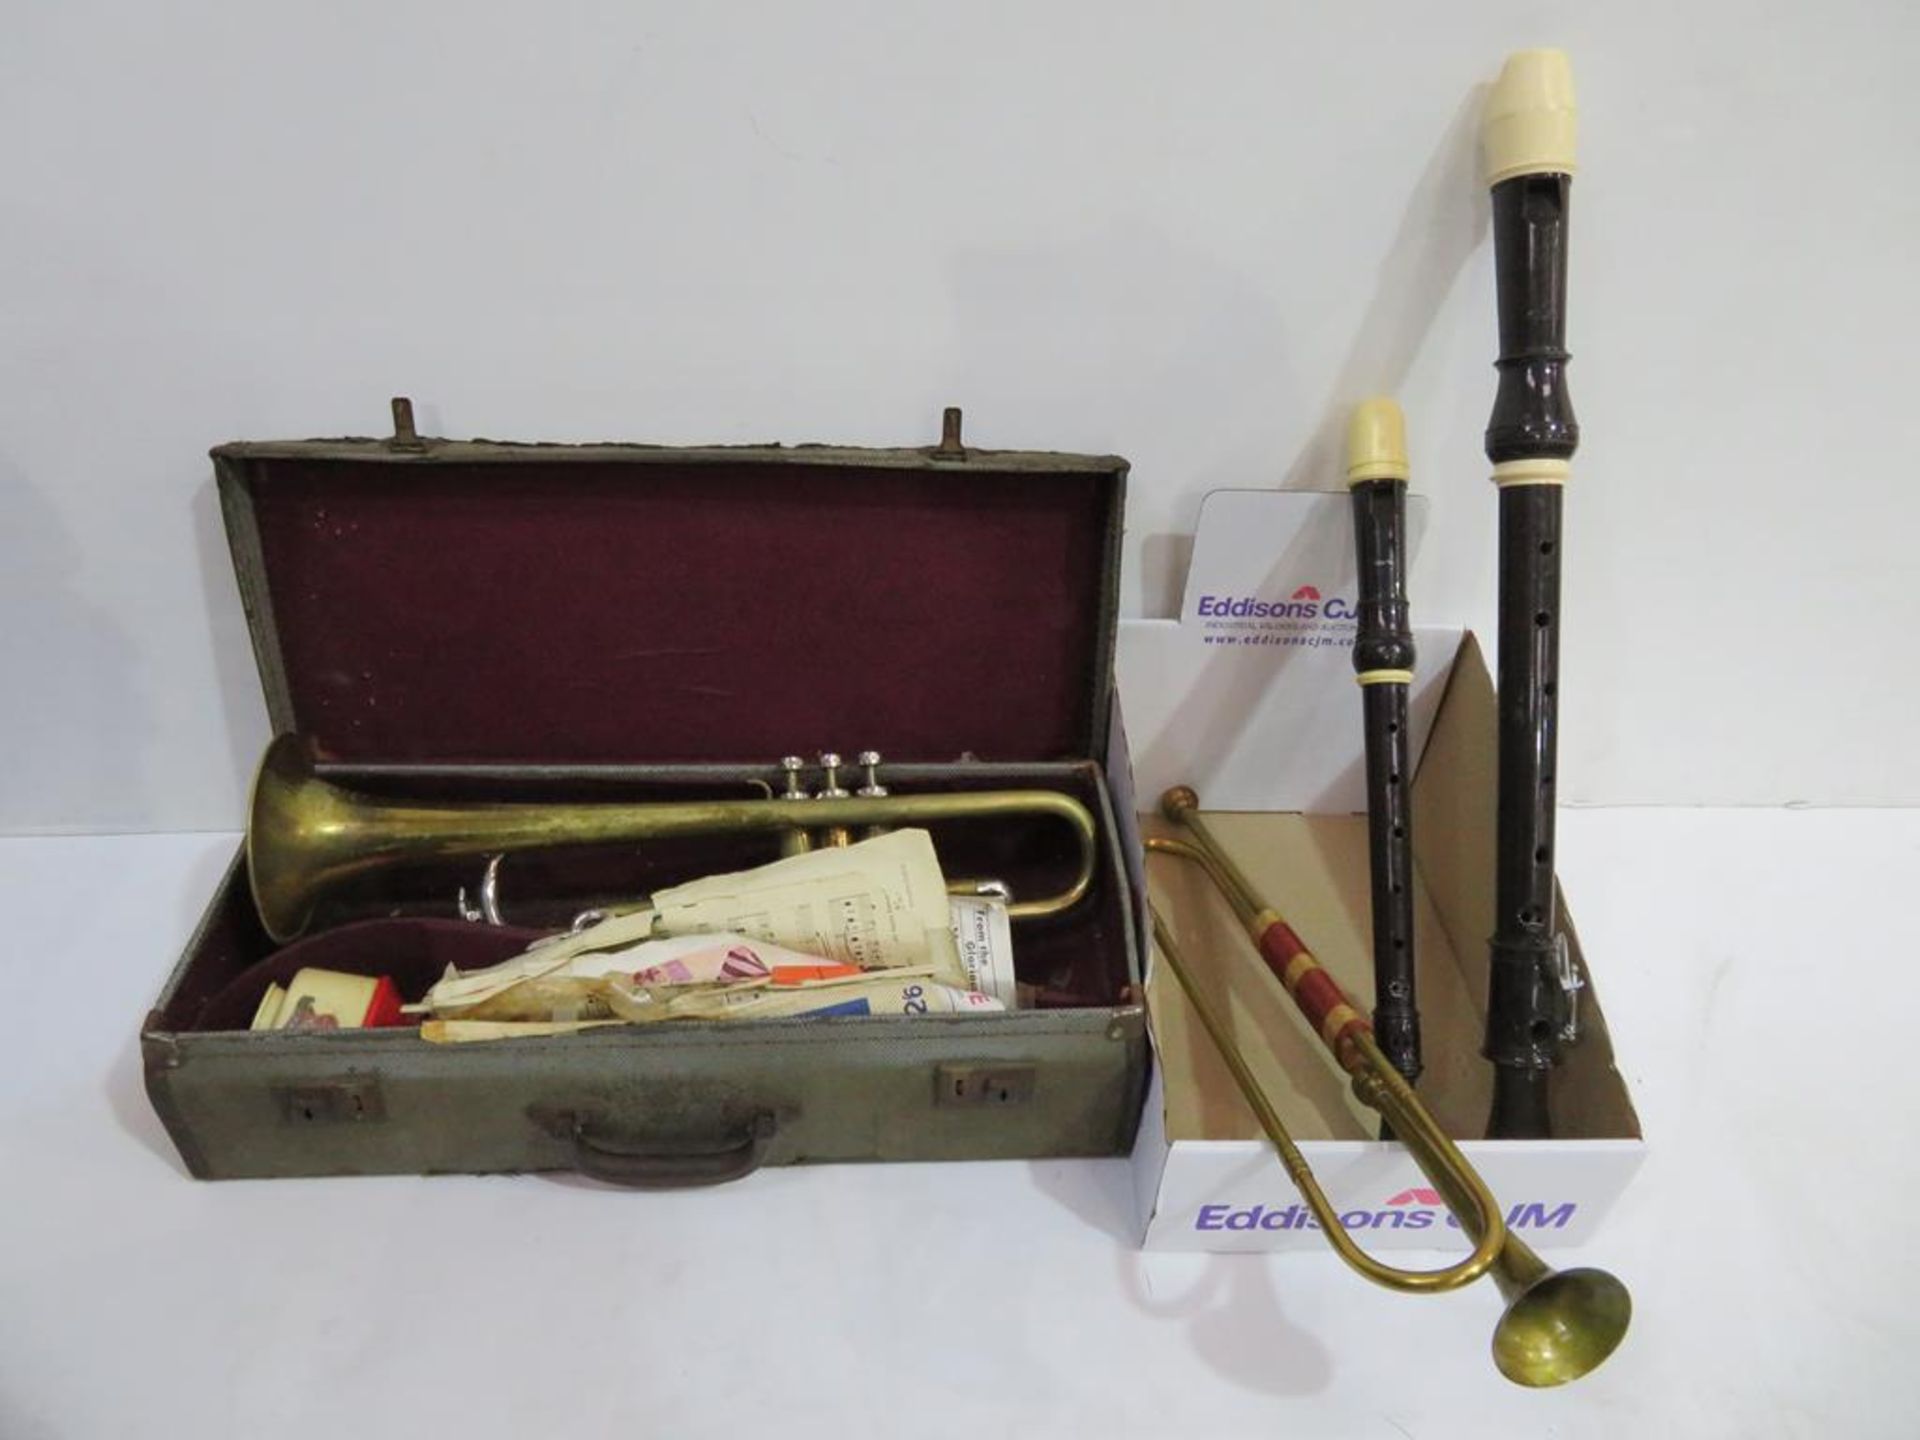 A Selection of Musical Instruments